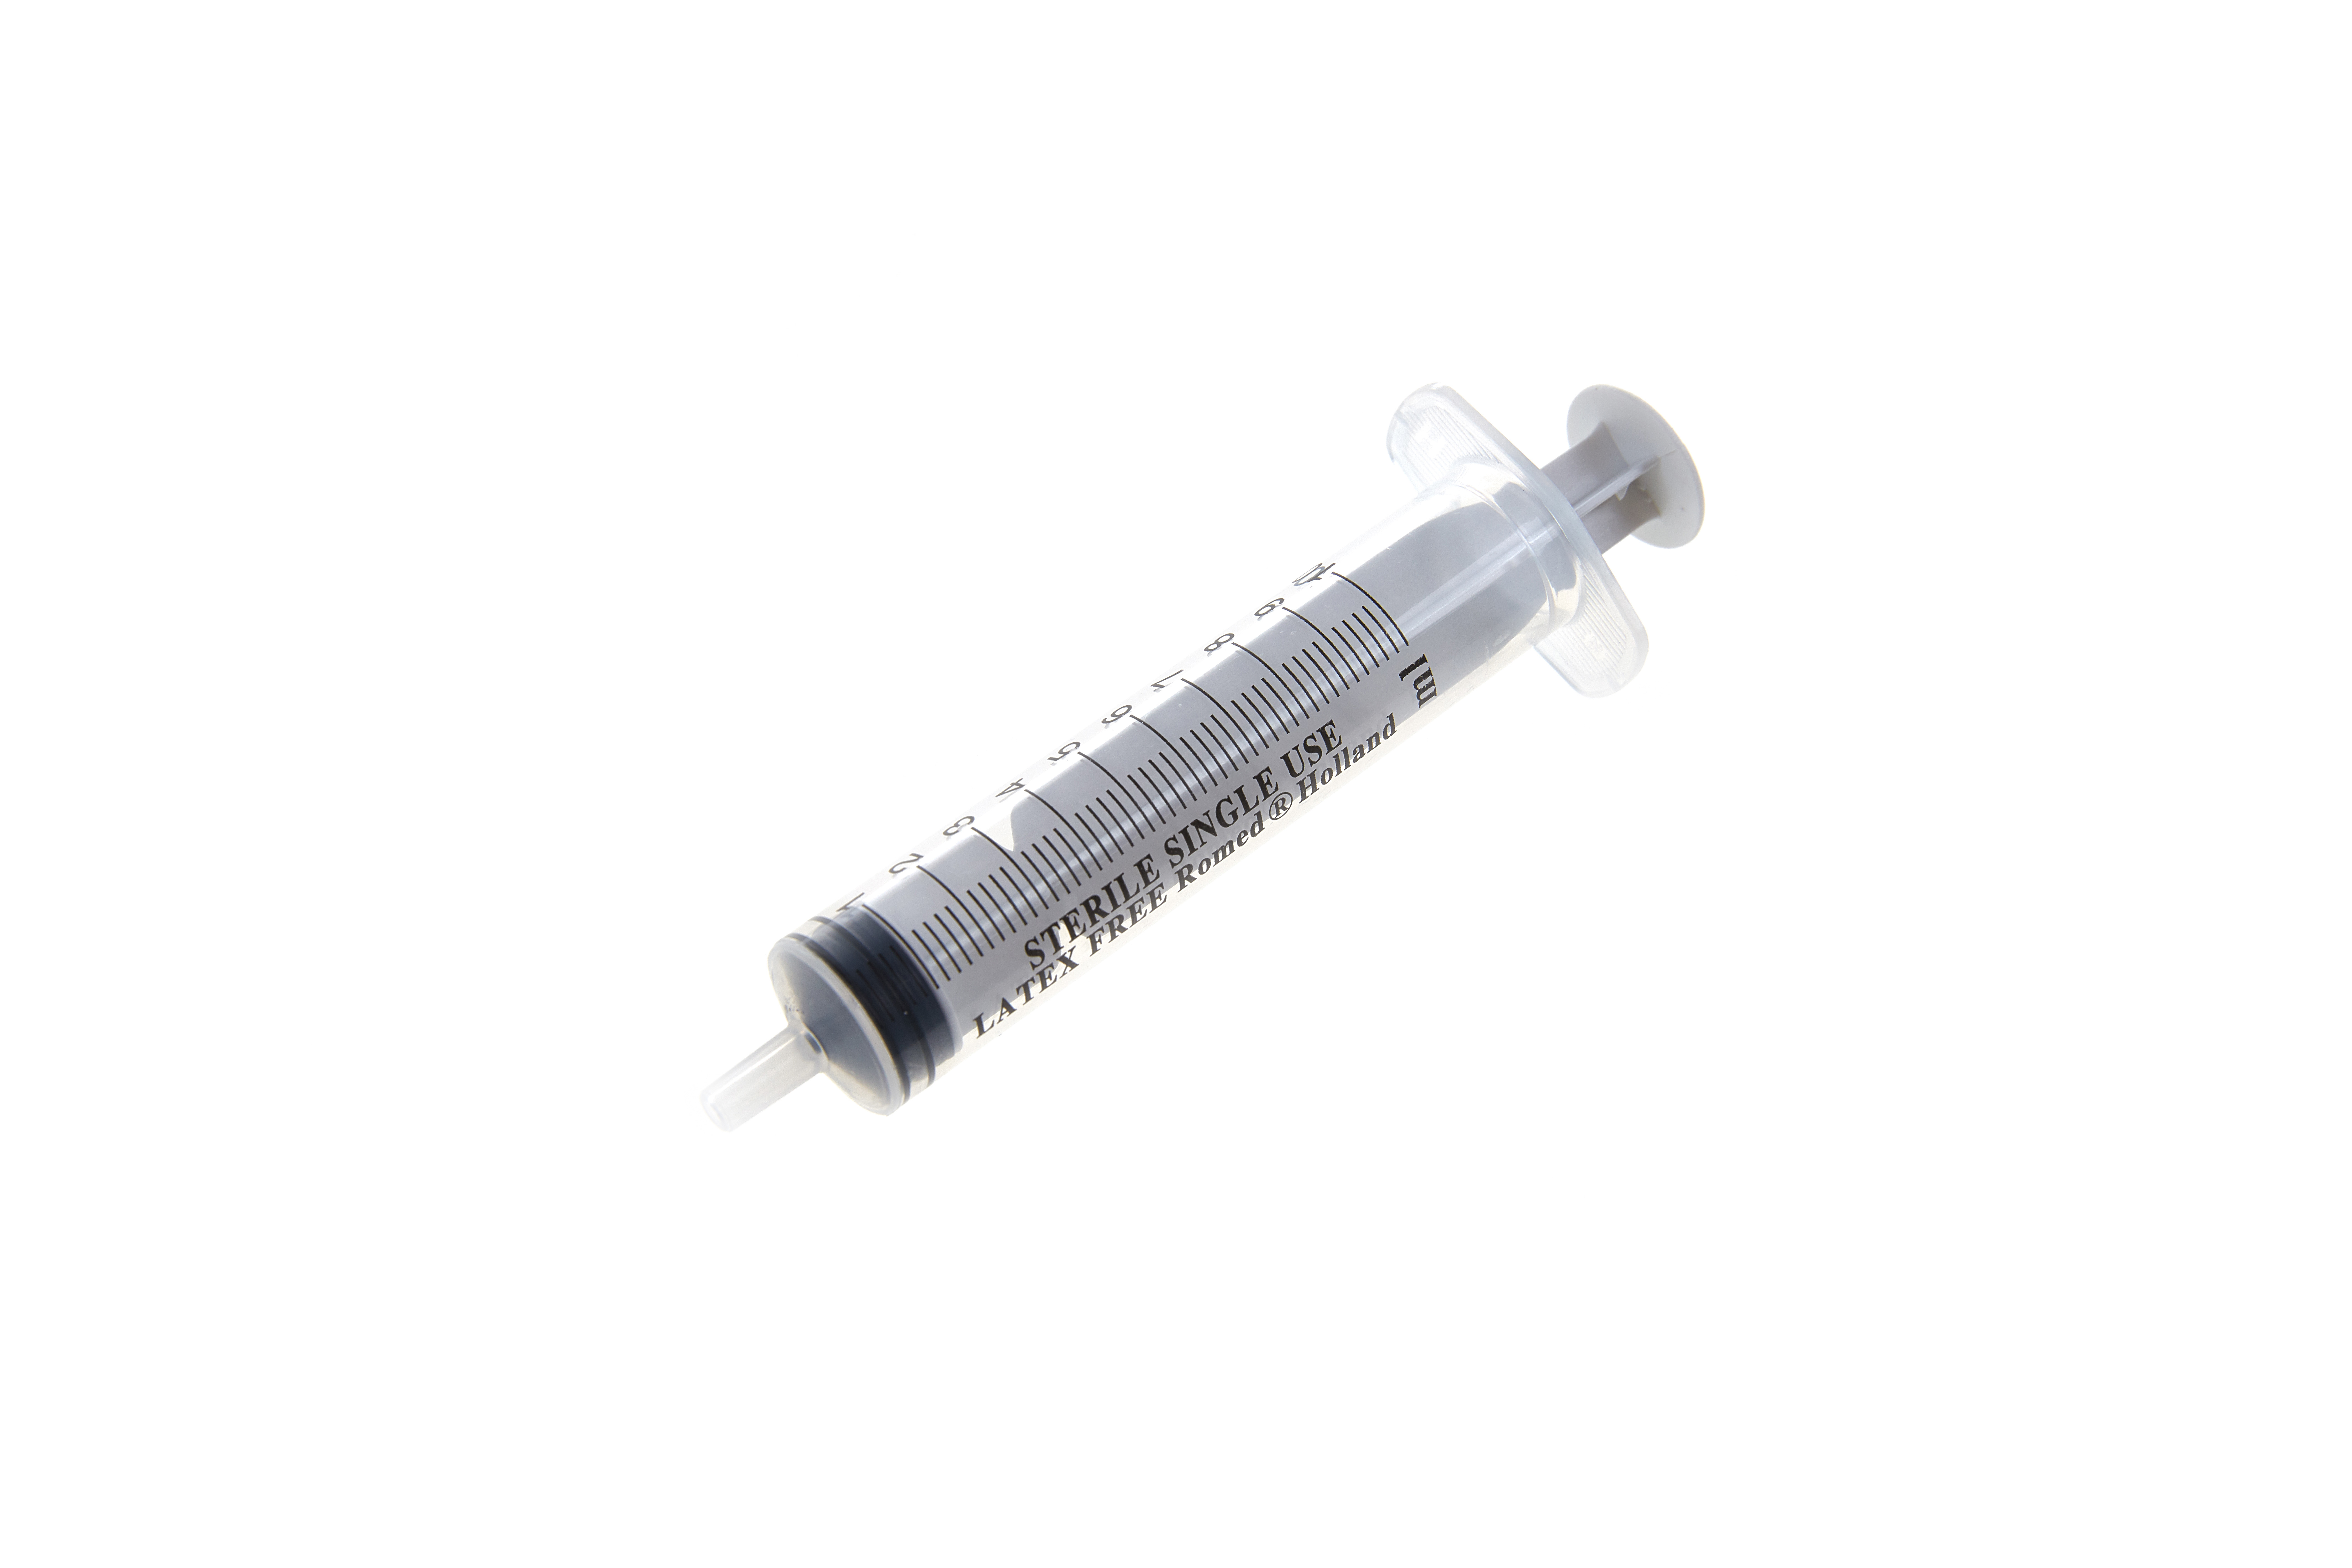 3SYR-10ML Romed 3-part syringes 10ml, without needle, sterile per piece, 100 pcs in an inner box, 16 x 100 pcs = 1.600 pcs in a carton.